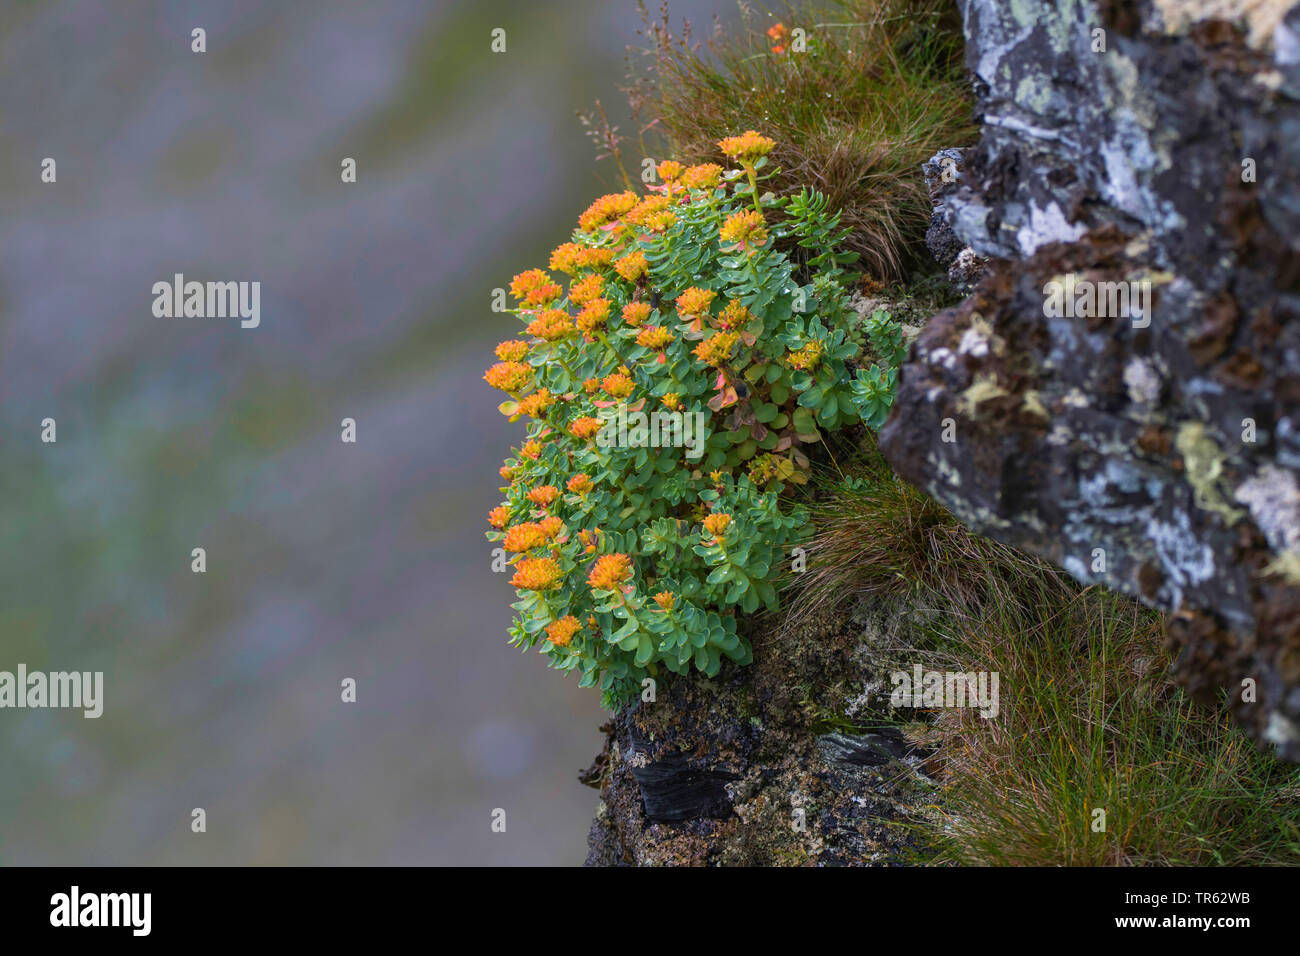 King's crown, Midsummer-mem, Rose root (Rhodiola rosea), blooming on a rock, Norway, Finnmark, Tanahorn Stock Photo